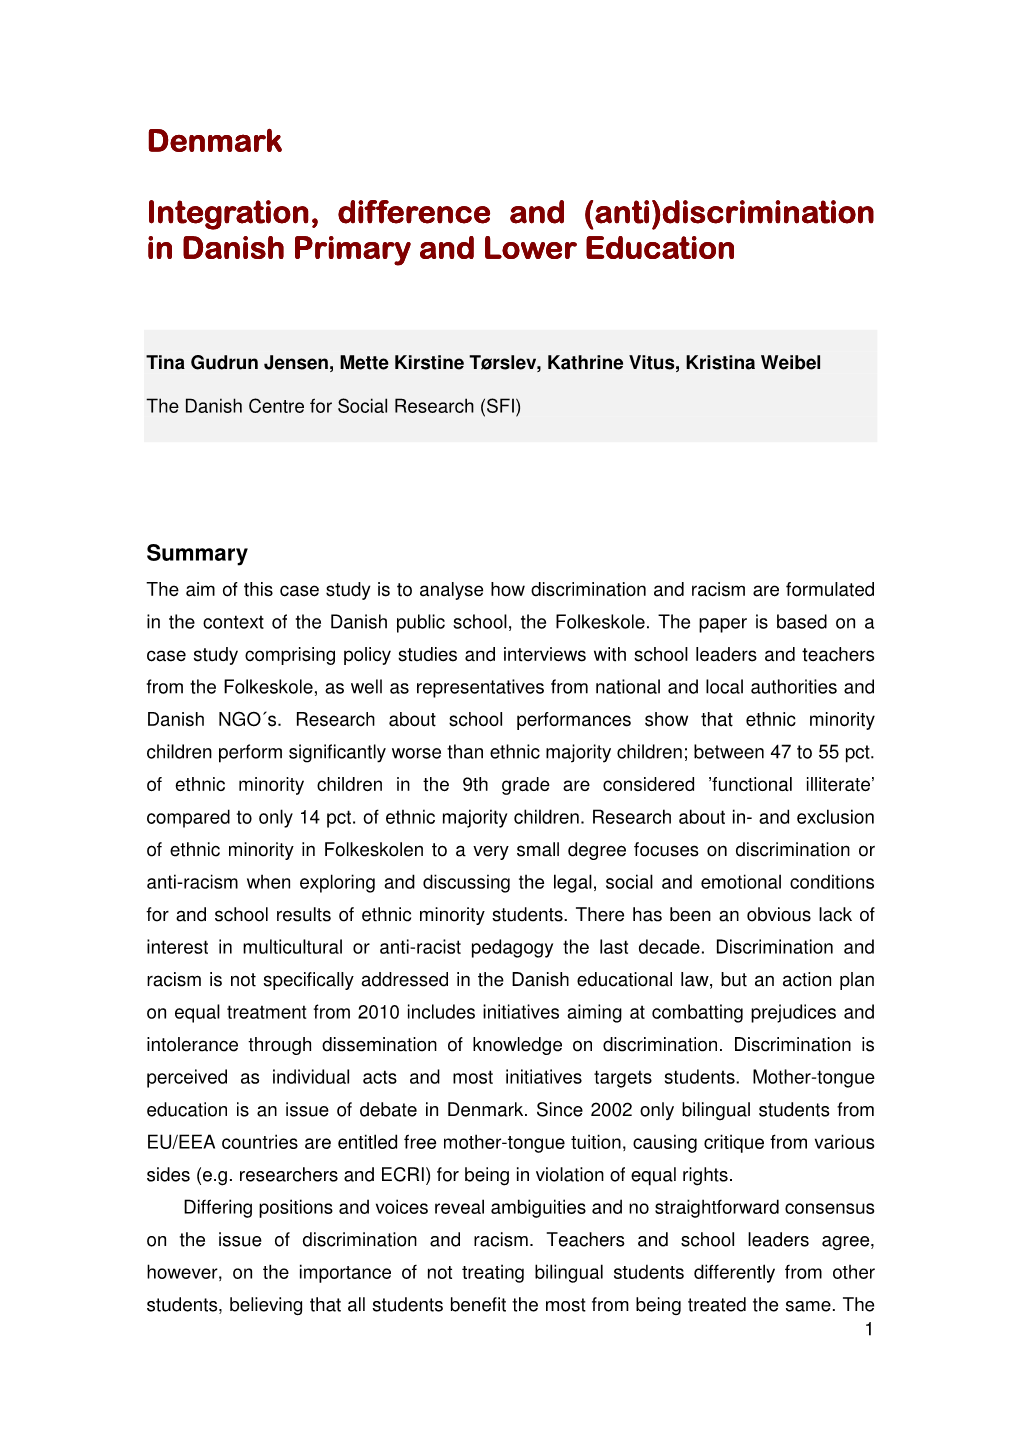 Denmark Integration, D Integration, Difference and (Anti)Discrimination Ifference and (Anti)Discrimination in Danish Primary